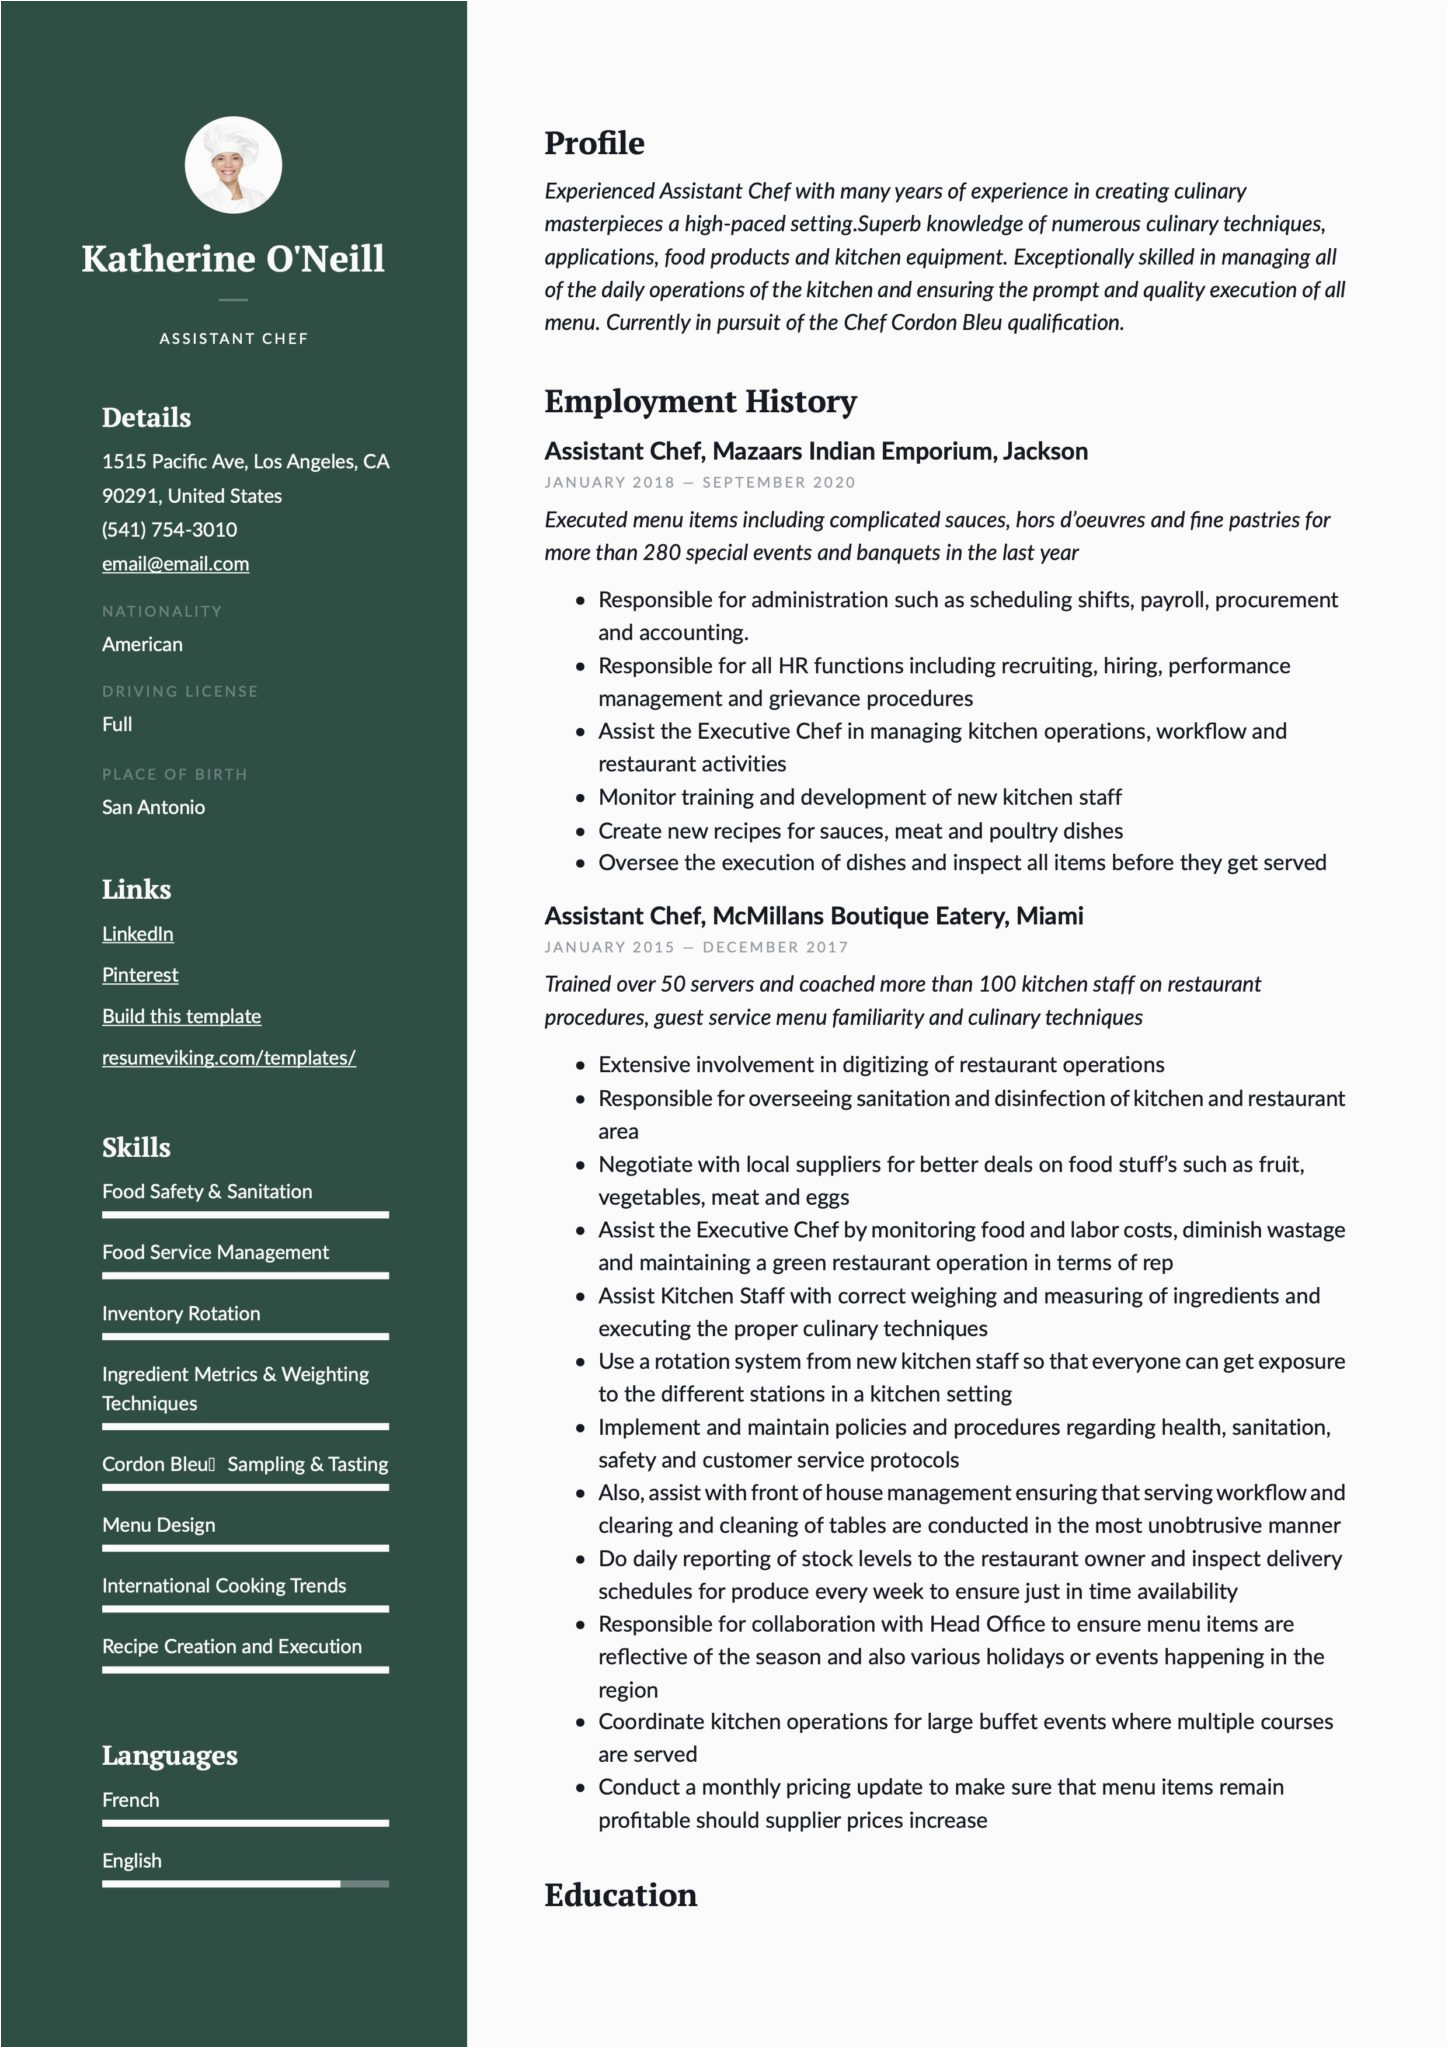 Sample Resume where I Can Utilize My assistant Chef Resume & Writing Guide